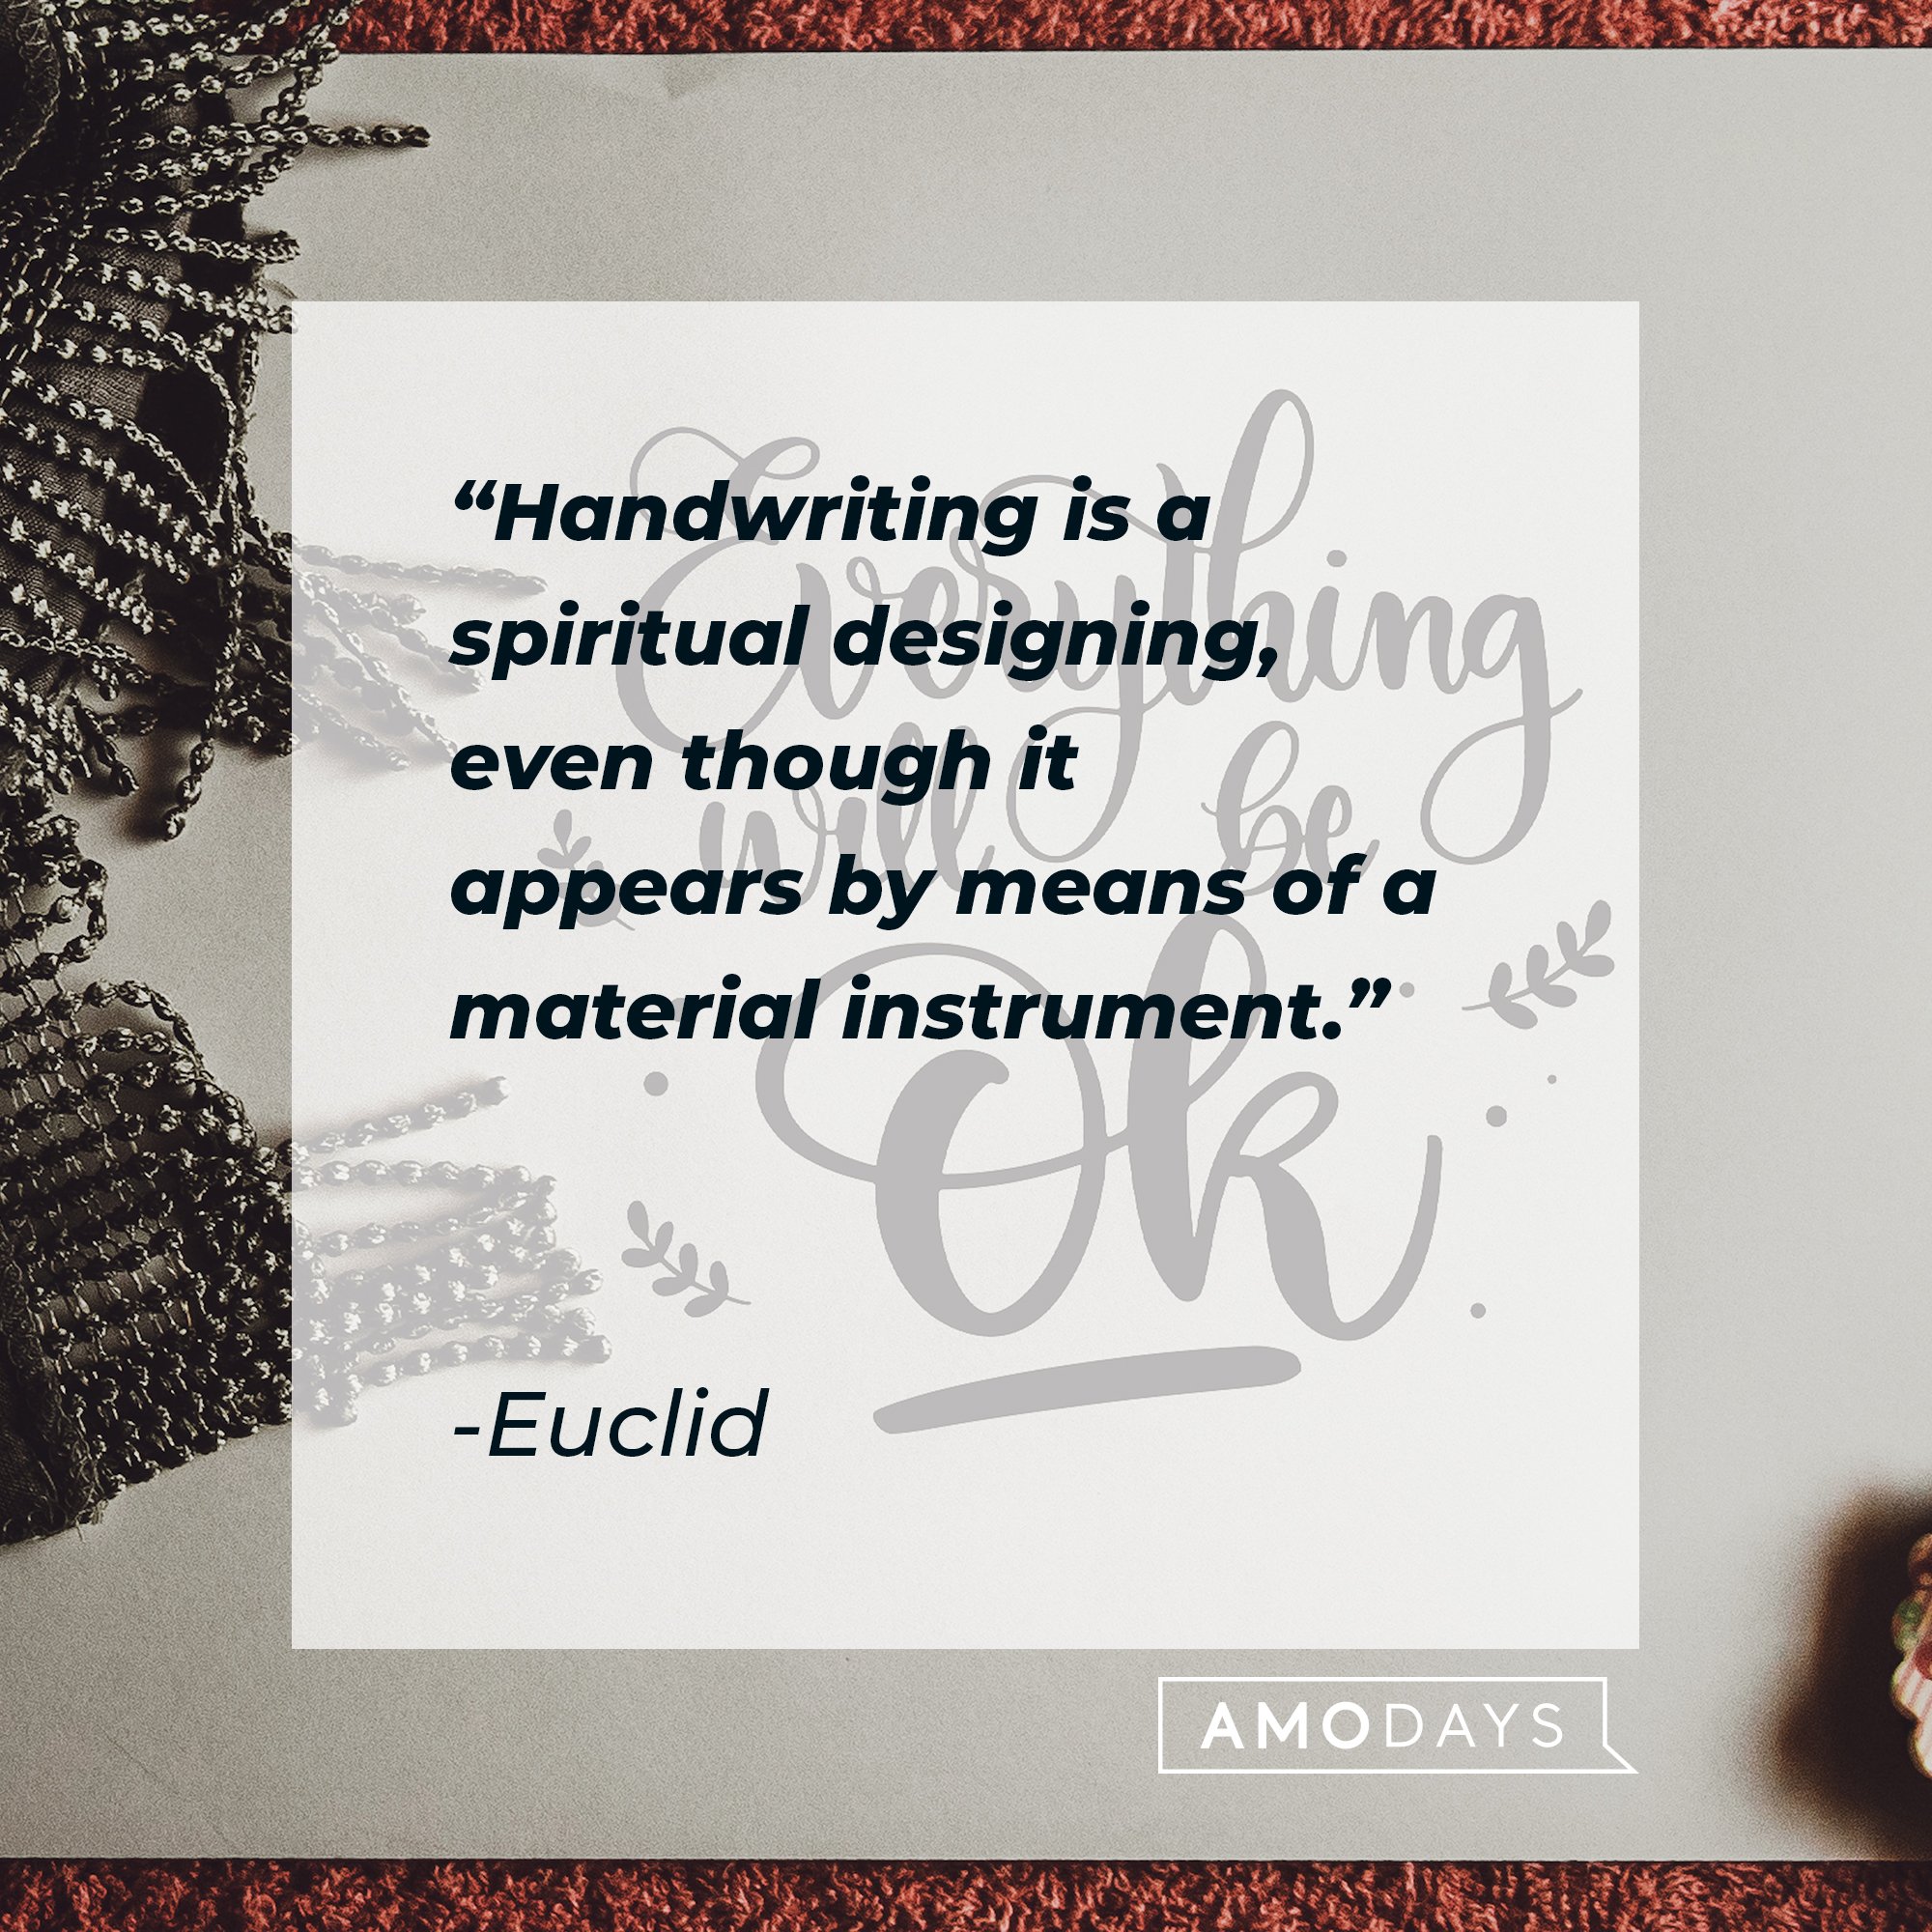 Euclid’s quote: “Handwriting is a spiritual designing, even though it appears by means of a material instrument.” | Image: AmoDays